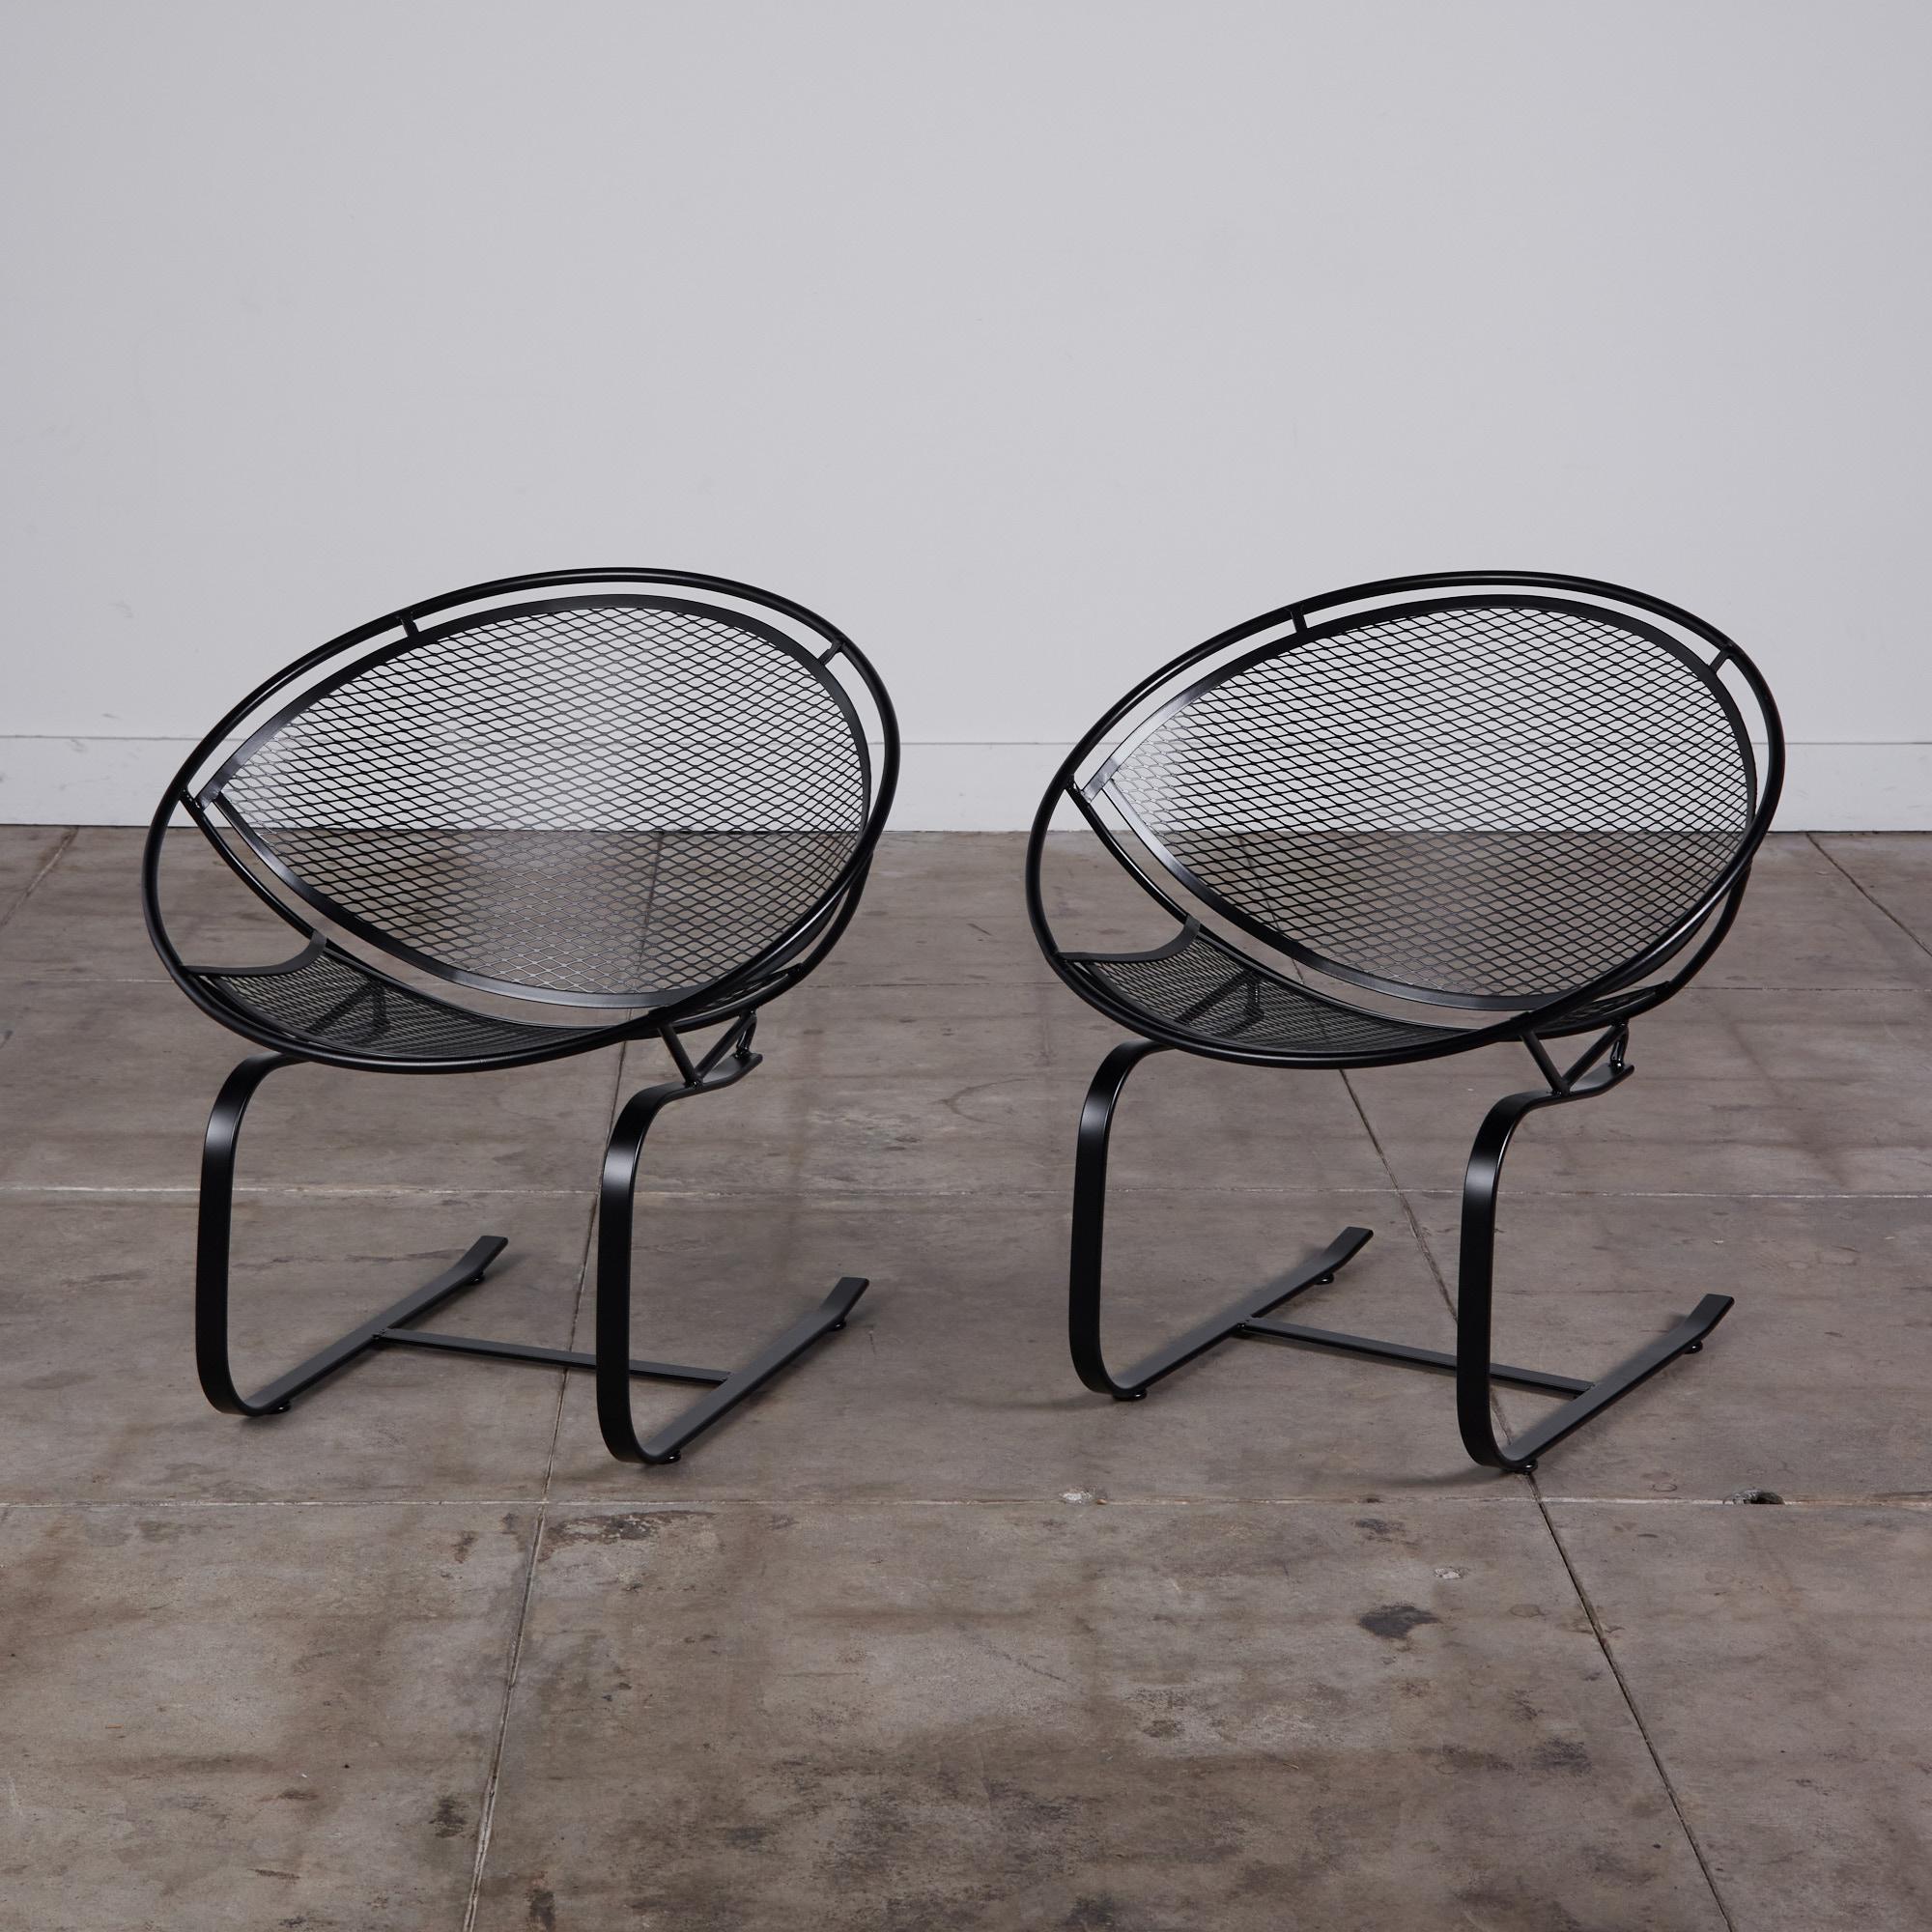 Wrought iron rocking chairs from Maurizio Tempestini's 1950s “Radar” collection for John Salterini. The chairs have a hoop construction with a delicate grid of wrought iron forming the body and a cantilevered spring base.

Dimensions: 30” width x